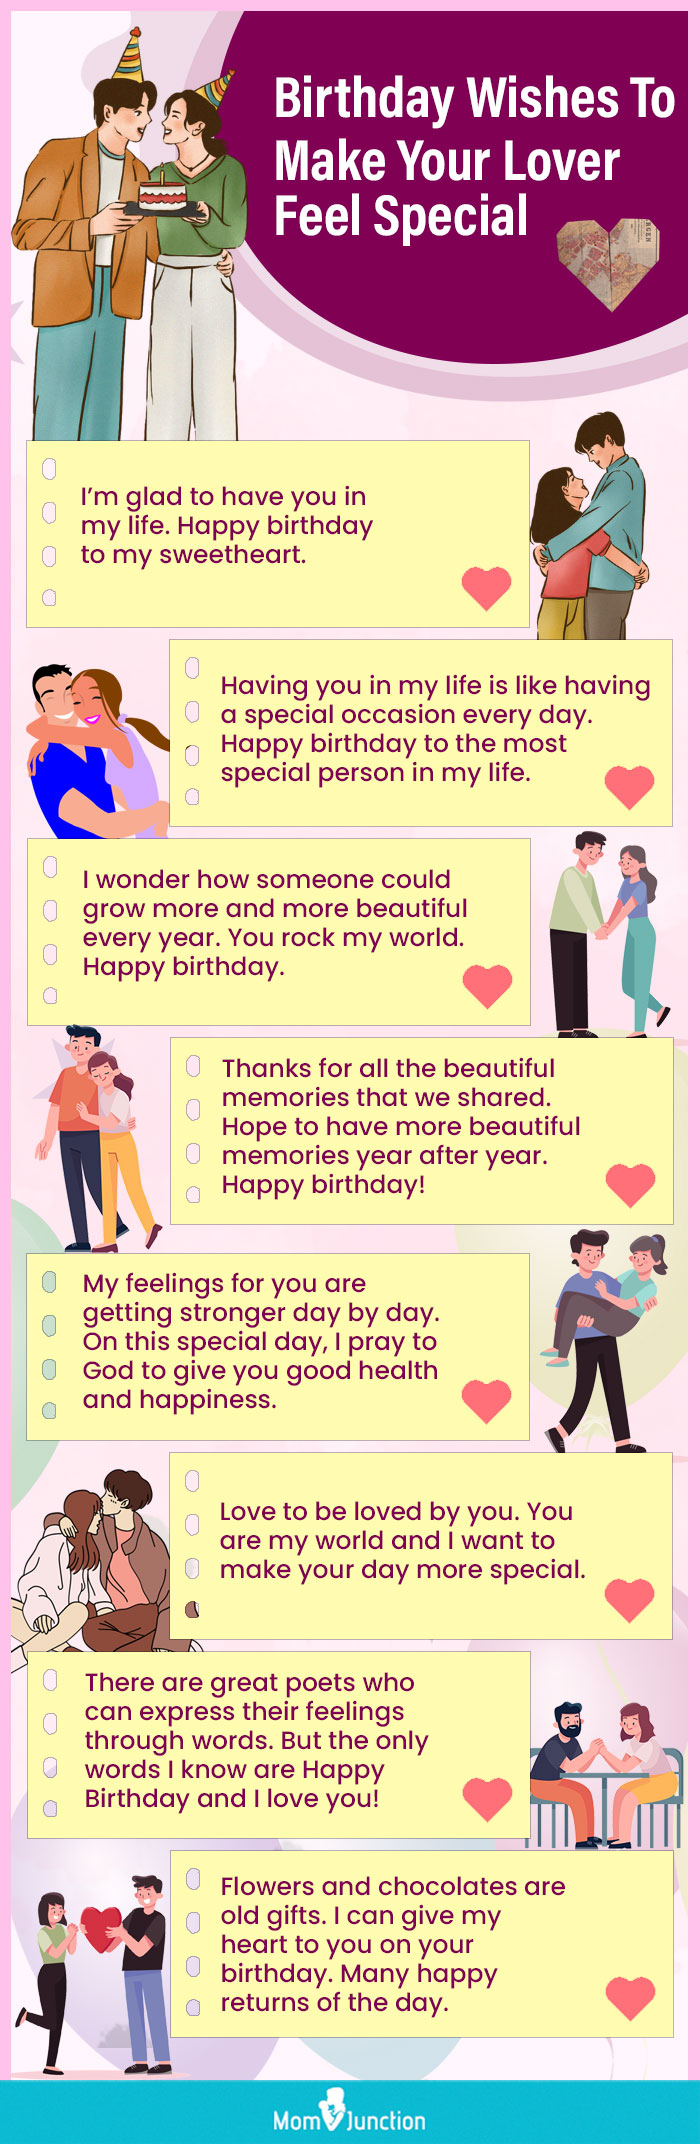 Birthday Gift Ideas for Your Girlfriend